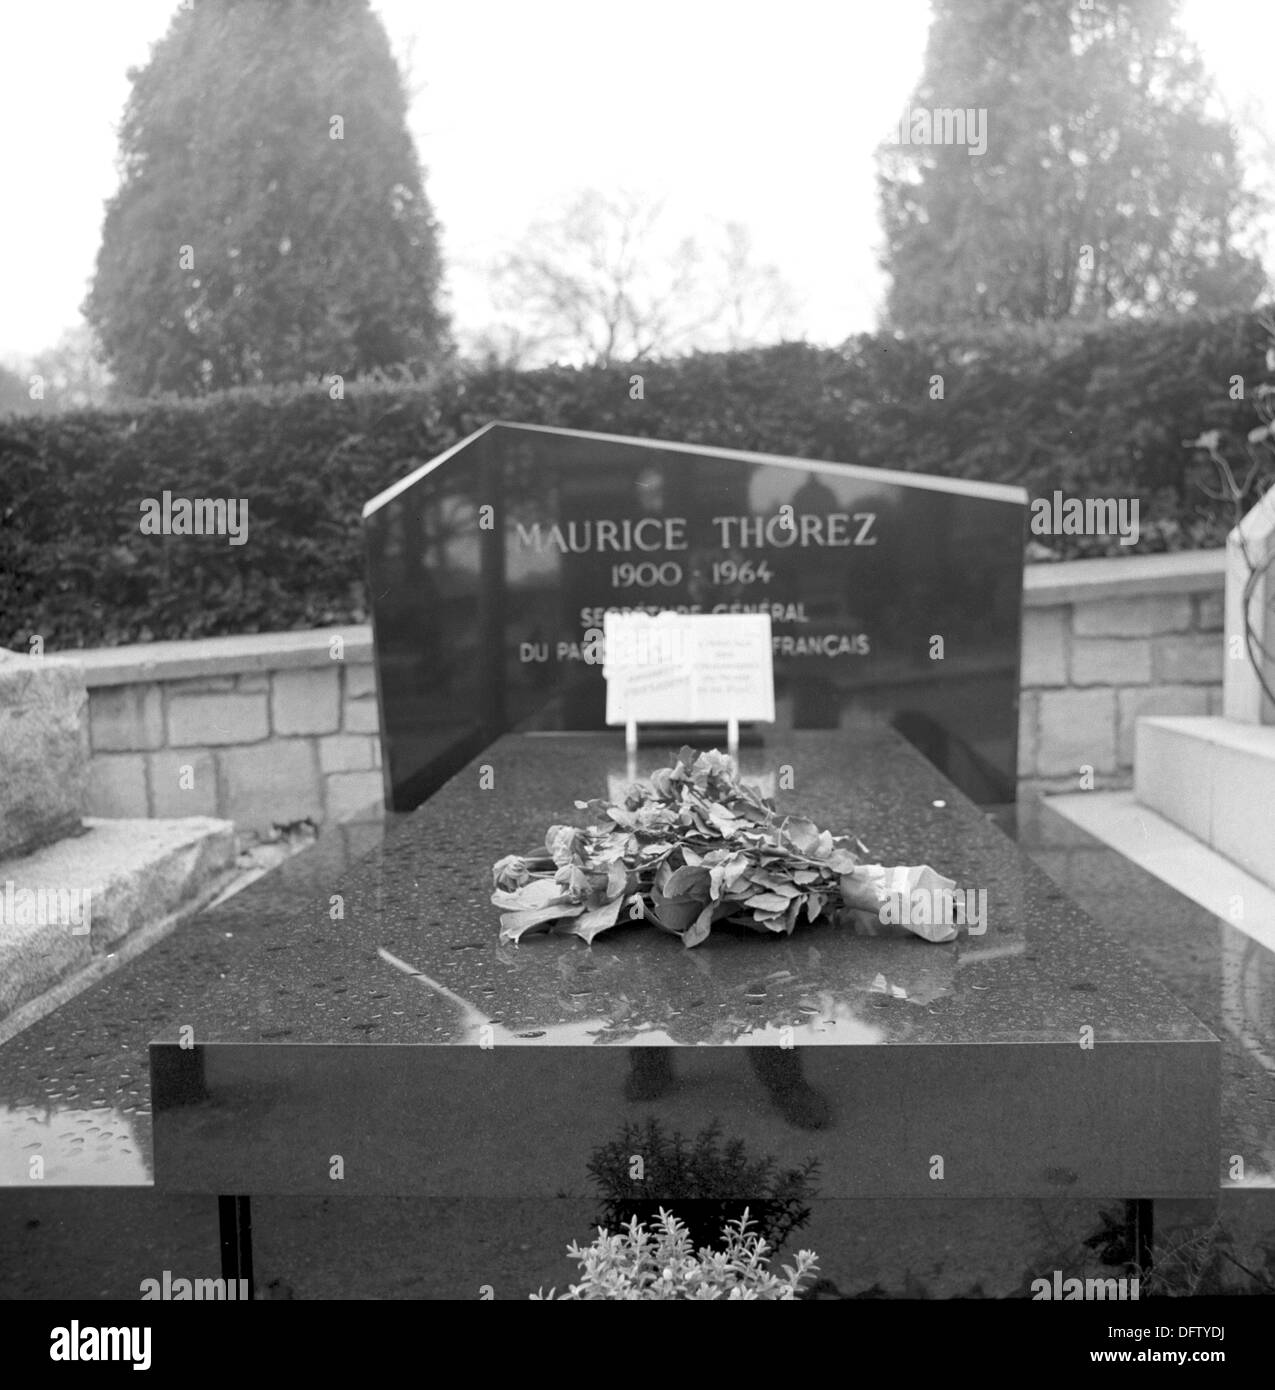 View of the grave of the former secretary general of the French Communist Party, Maurice Thorez, on the biggest cemetery of Paris, Pere Lachaise, in Paris, France, 13 November 1970. Thorez was secretary general of the party from 1930 until 1964. On the Pere Lachaise cemetery, many famous historical figures are buried. Photo: Wilfried Glienke Stock Photo